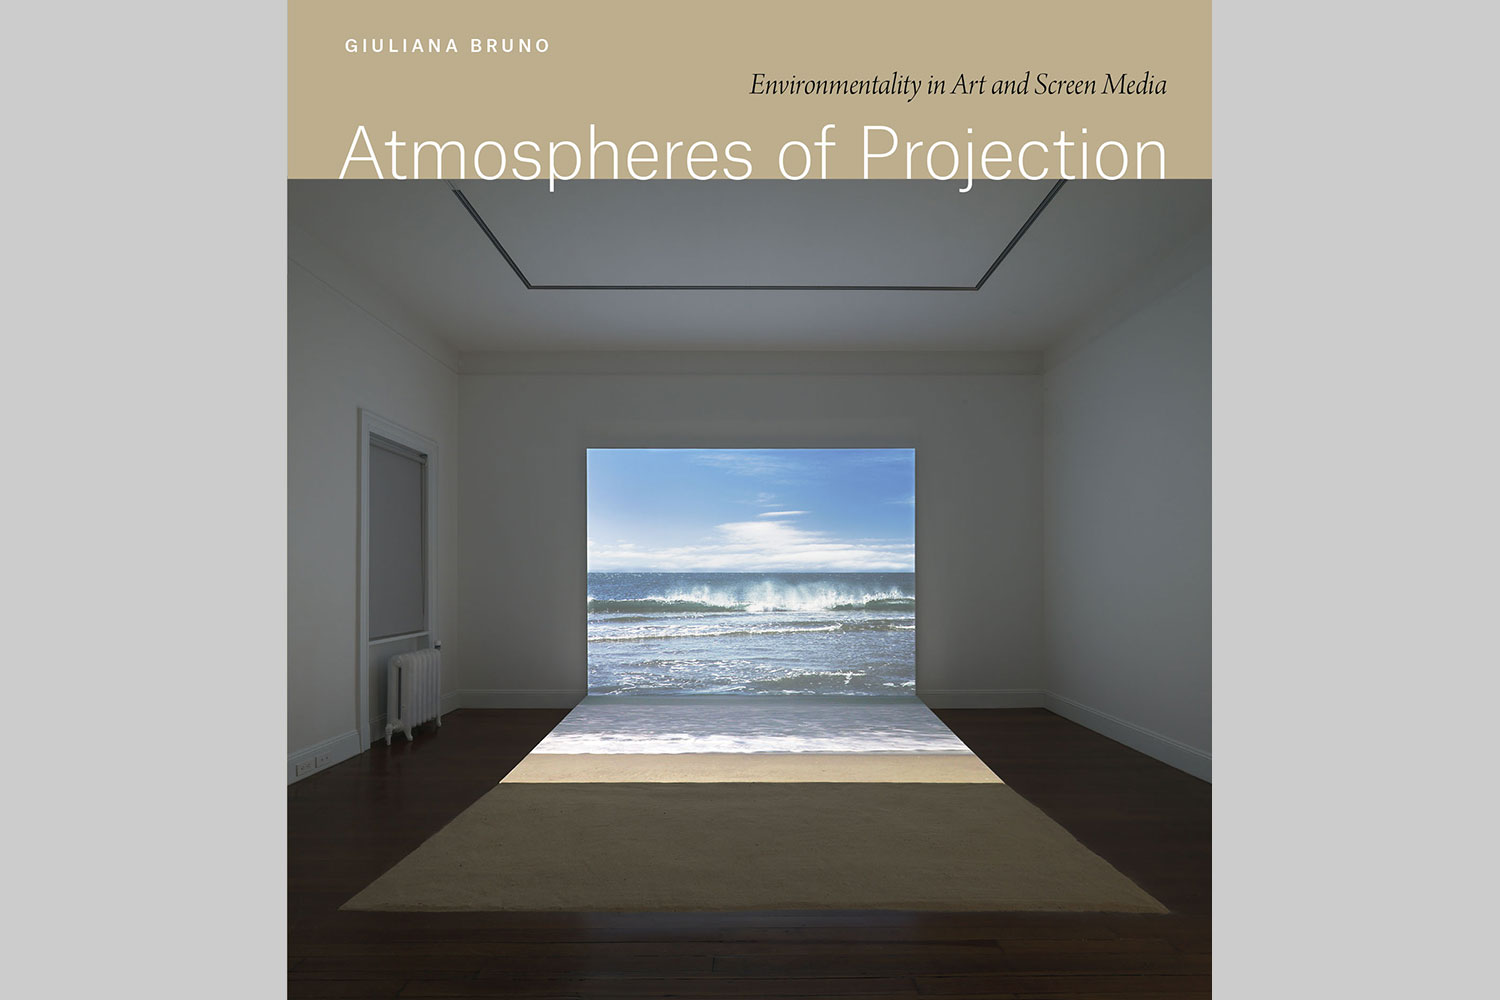 Book cover for Atmospheres of Projection: Environmentality in Art and Screen Media